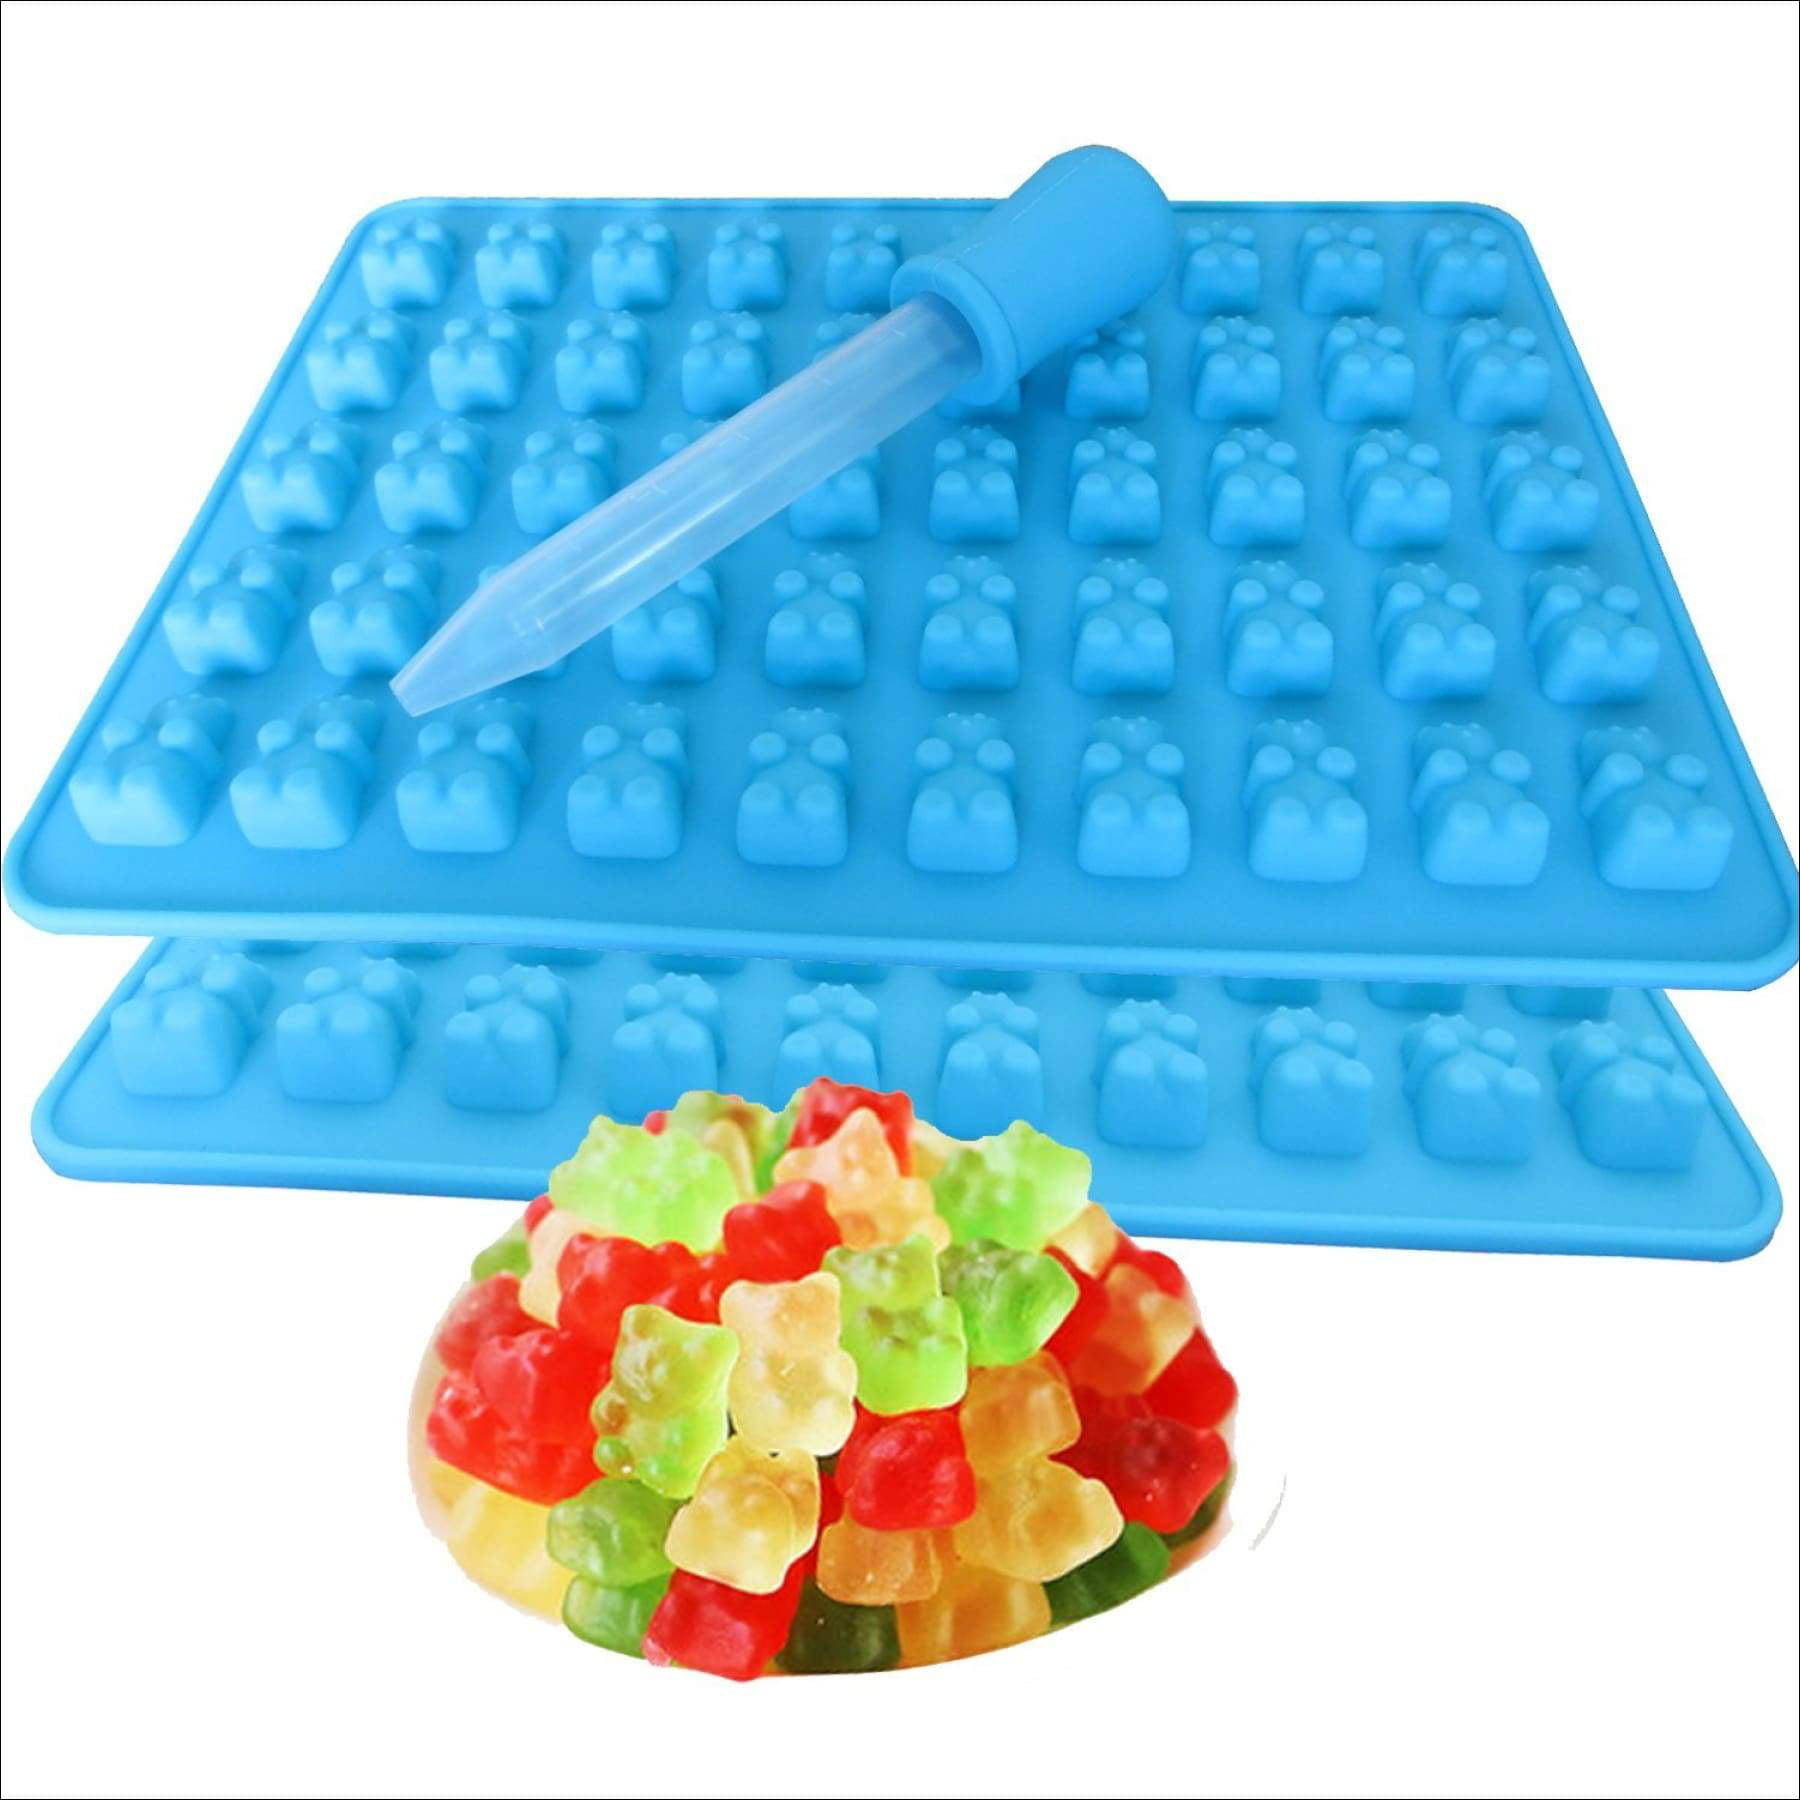 DIY Gummy Candy Silicone Chocolate Mould Maker Cavity Bear Ice Tray Mold Tools 